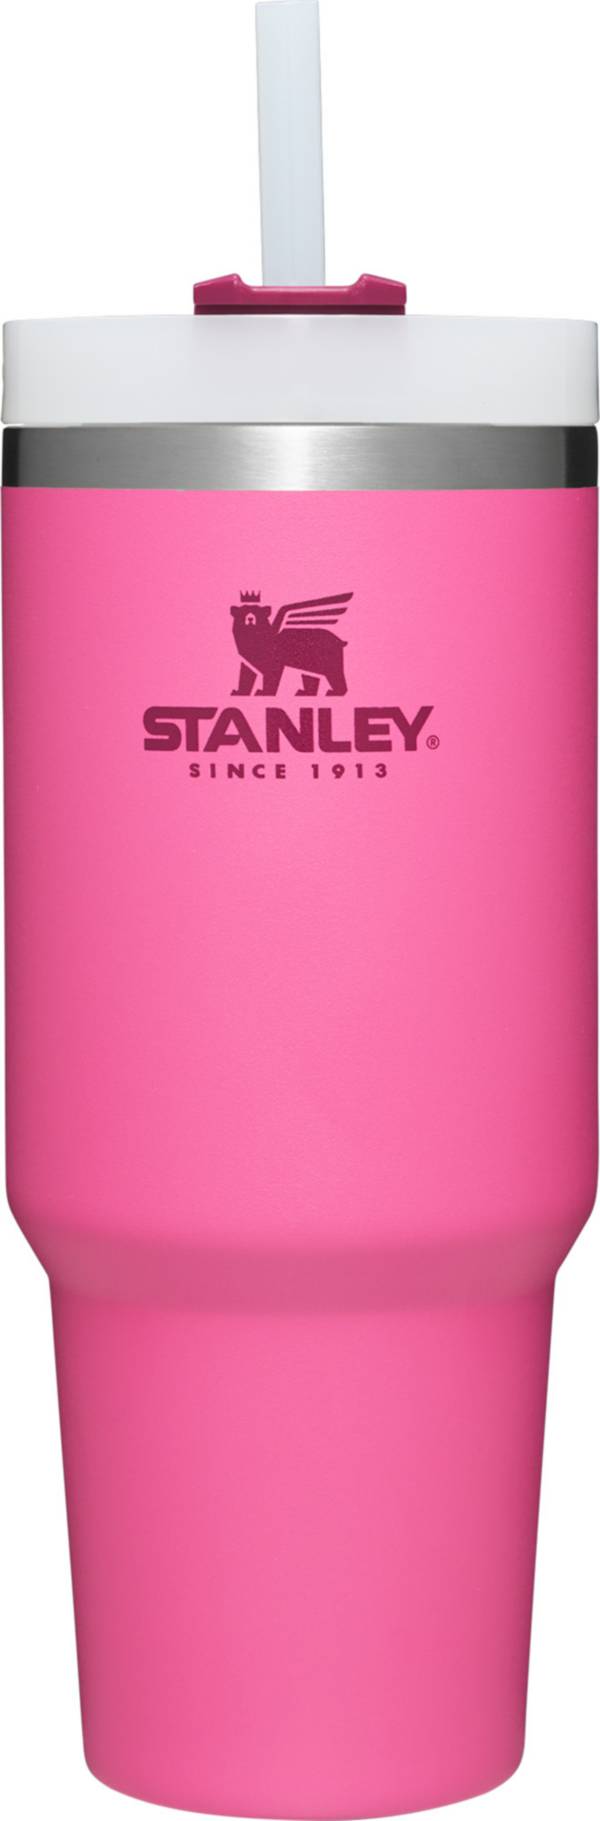 Stanley 30 oz. Quencher Tumbler product image